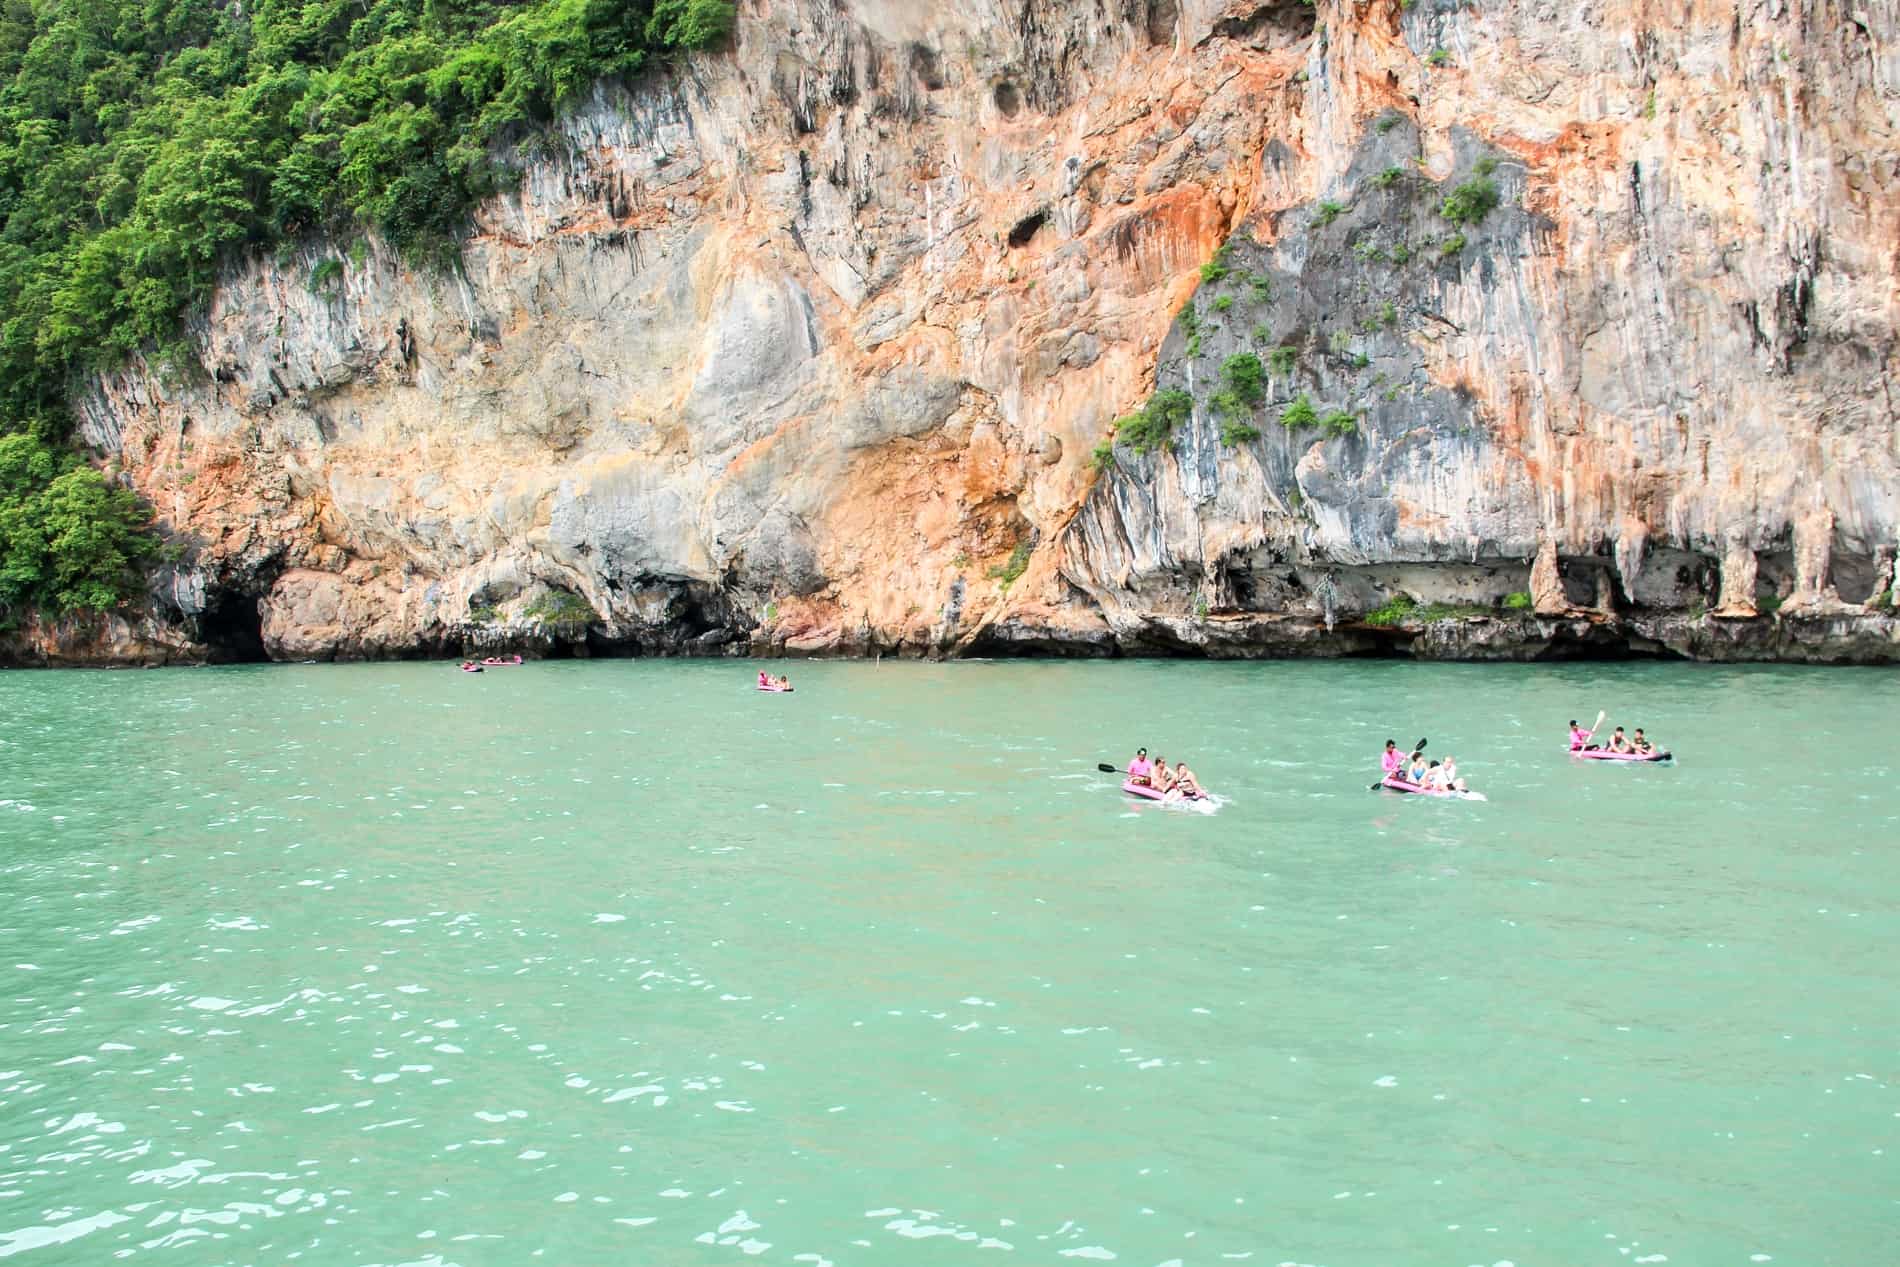 People canoeing in the emerald green water of a Thai island.